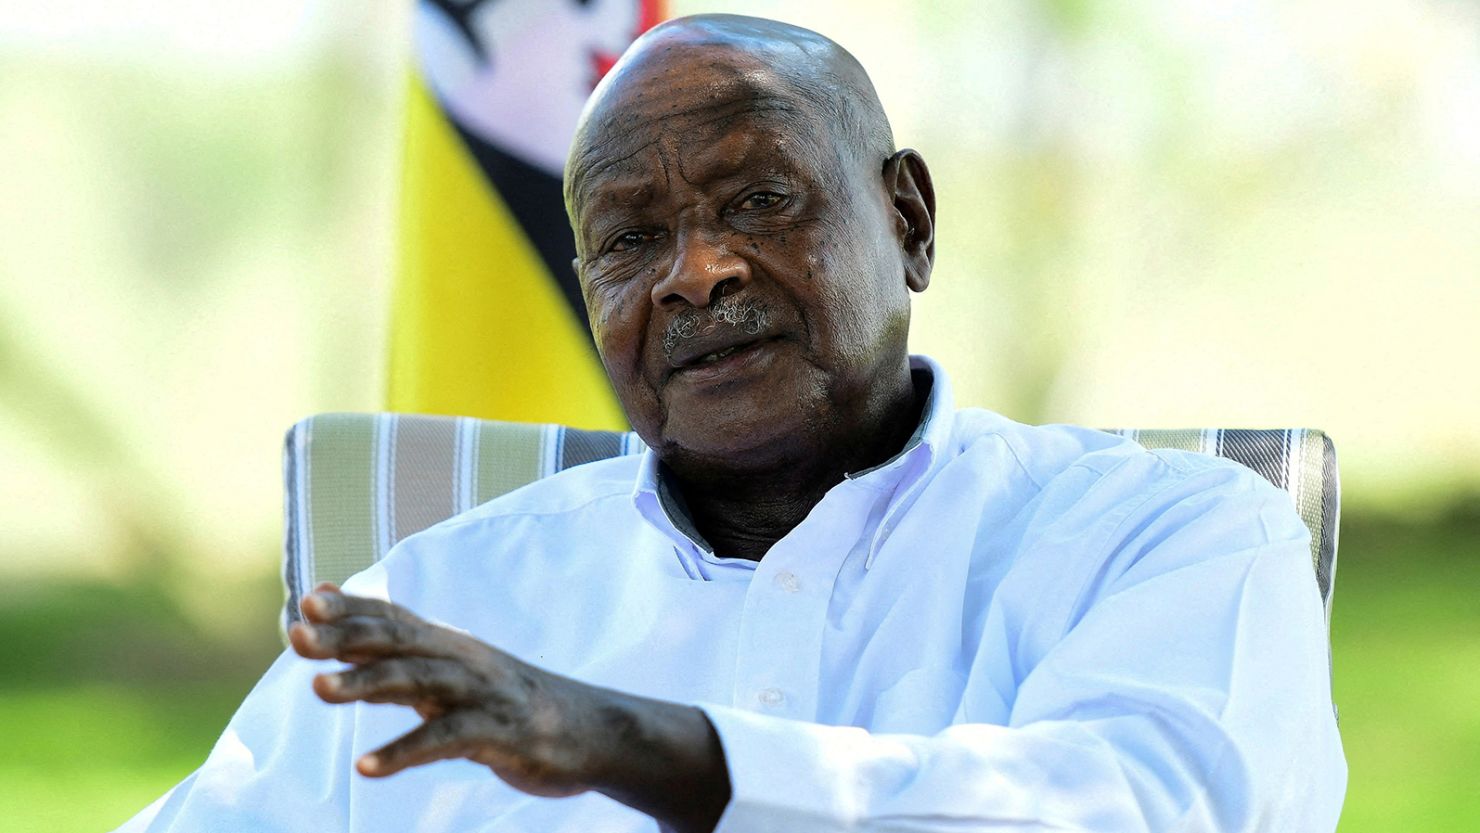 Uganda's President Yoweri Museveni speaks during a Reuters interview at his farm in Kisozi settlement of Gomba district, in the Central Region of Uganda, January 16, 2022. (Abubaker Lubowa/Reuters)